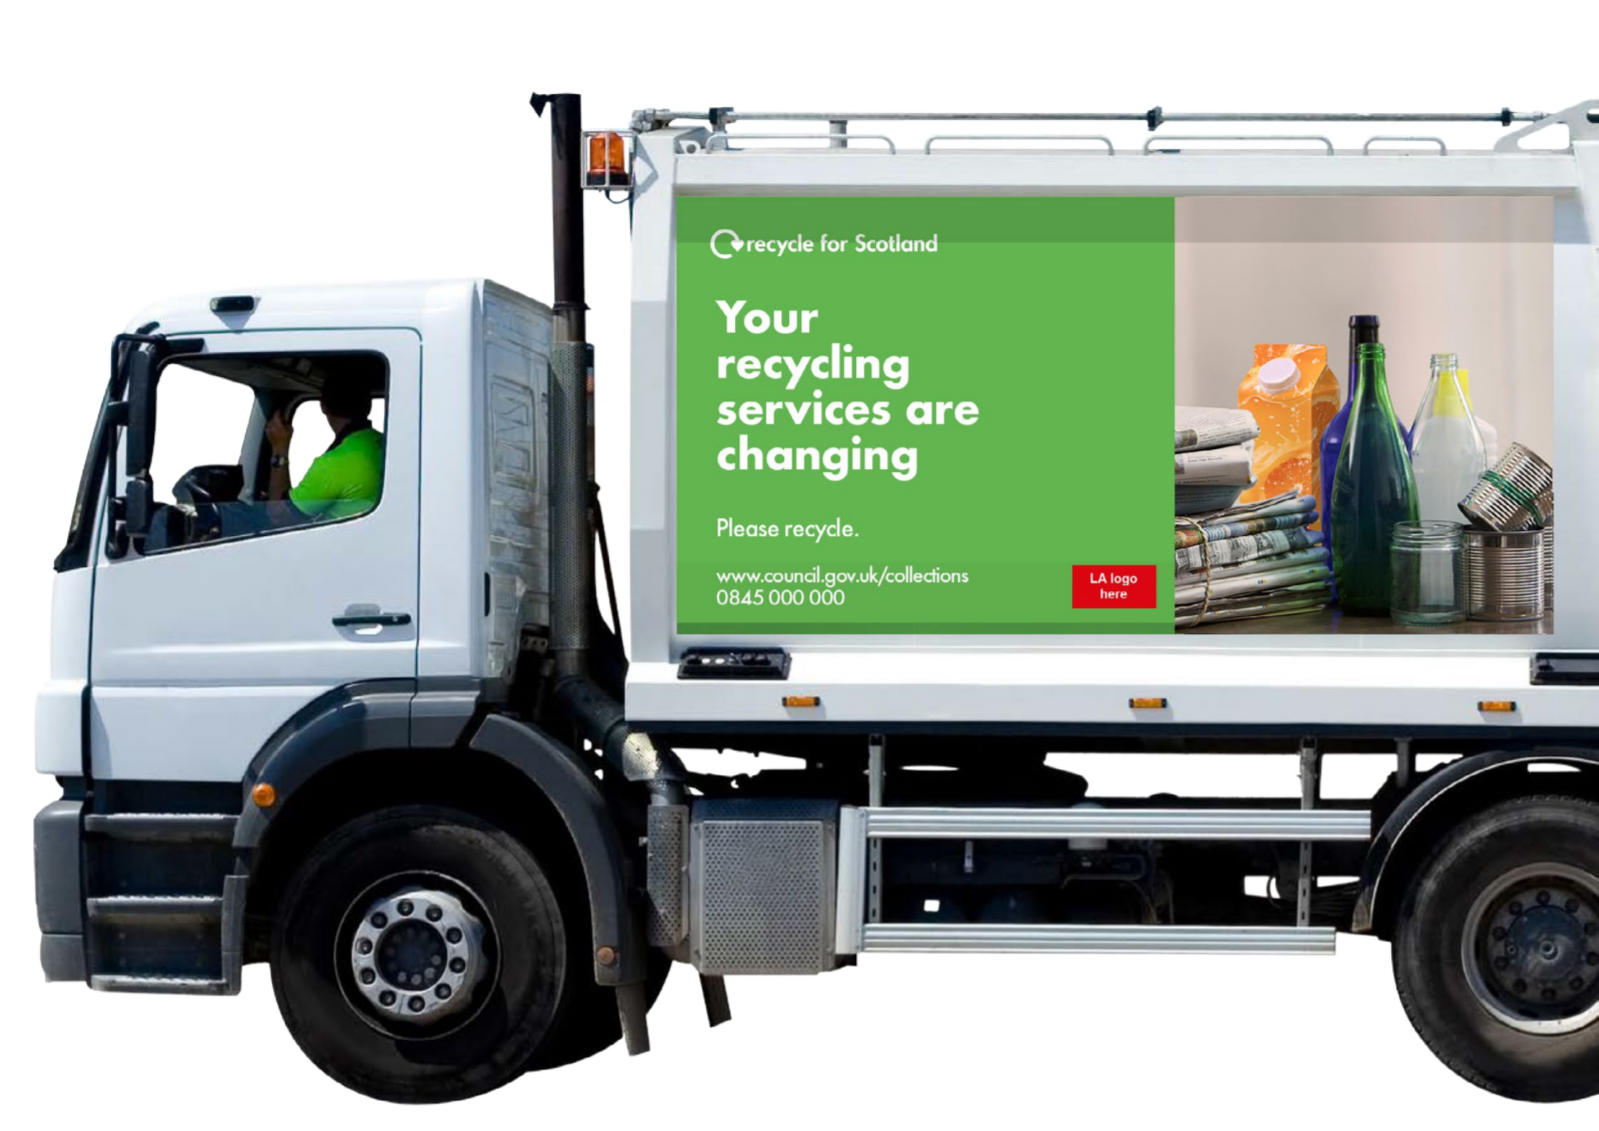  Household Recycling Charter – Service Change Vehicle Livery